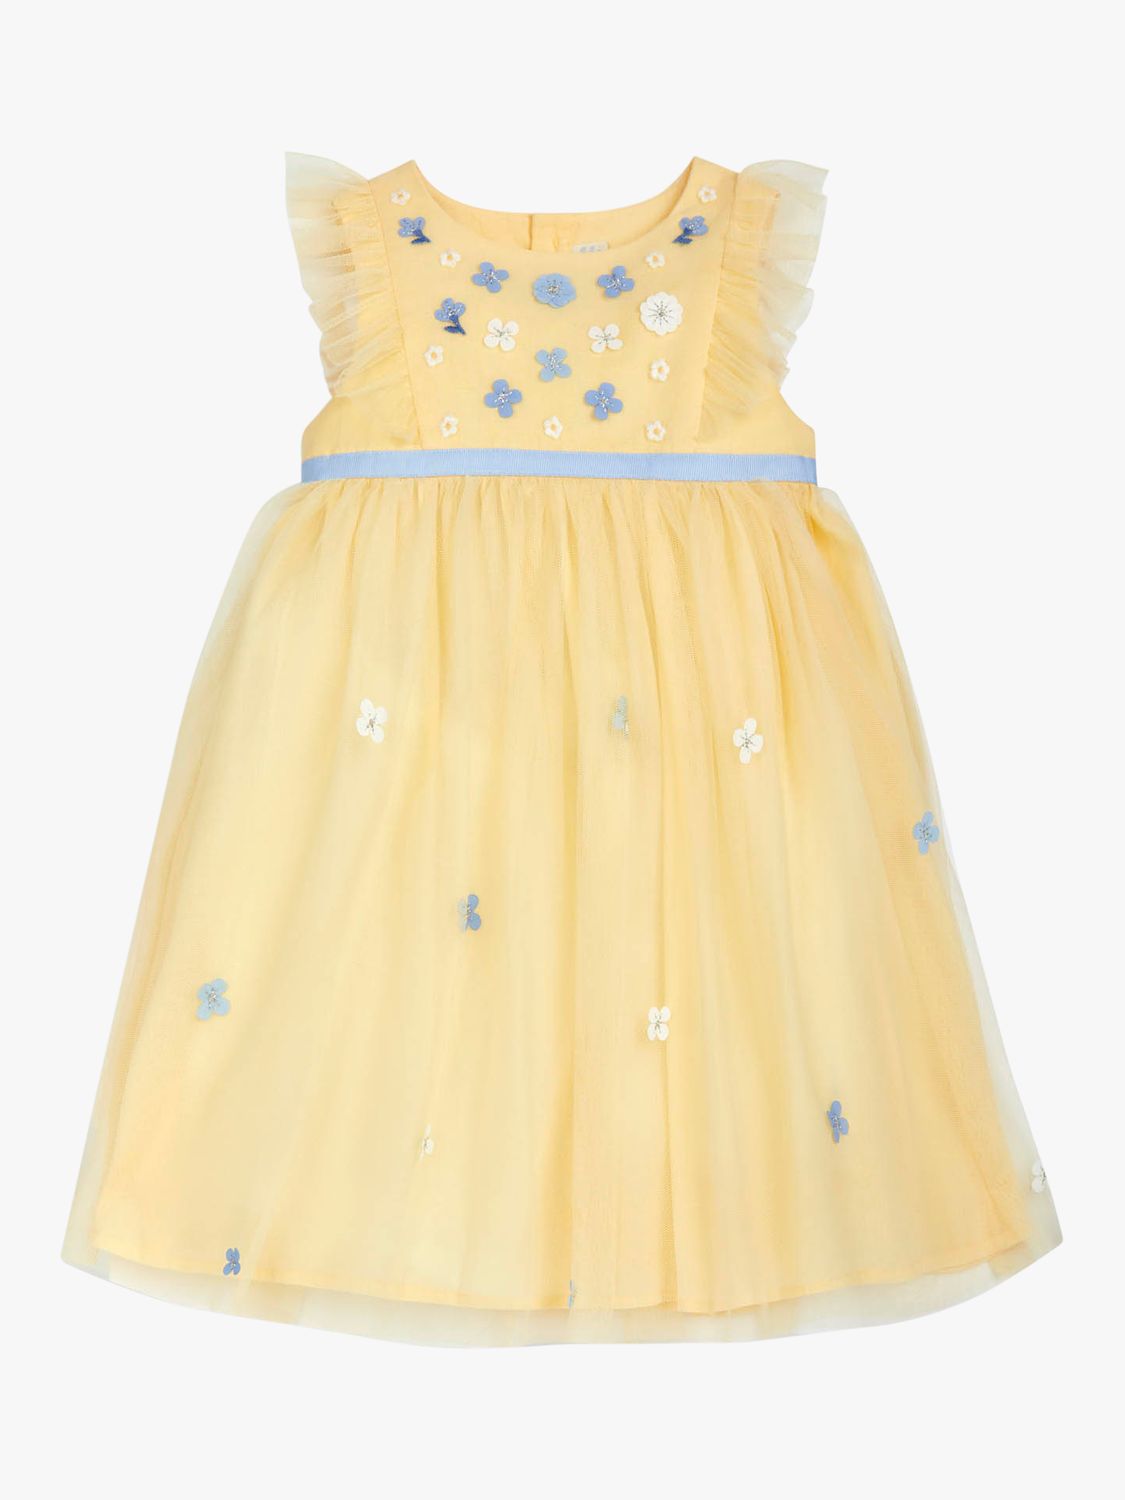 Buy JoJo Maman Bébé Baby Floral Tulle Party Dress, Yellow Online at johnlewis.com